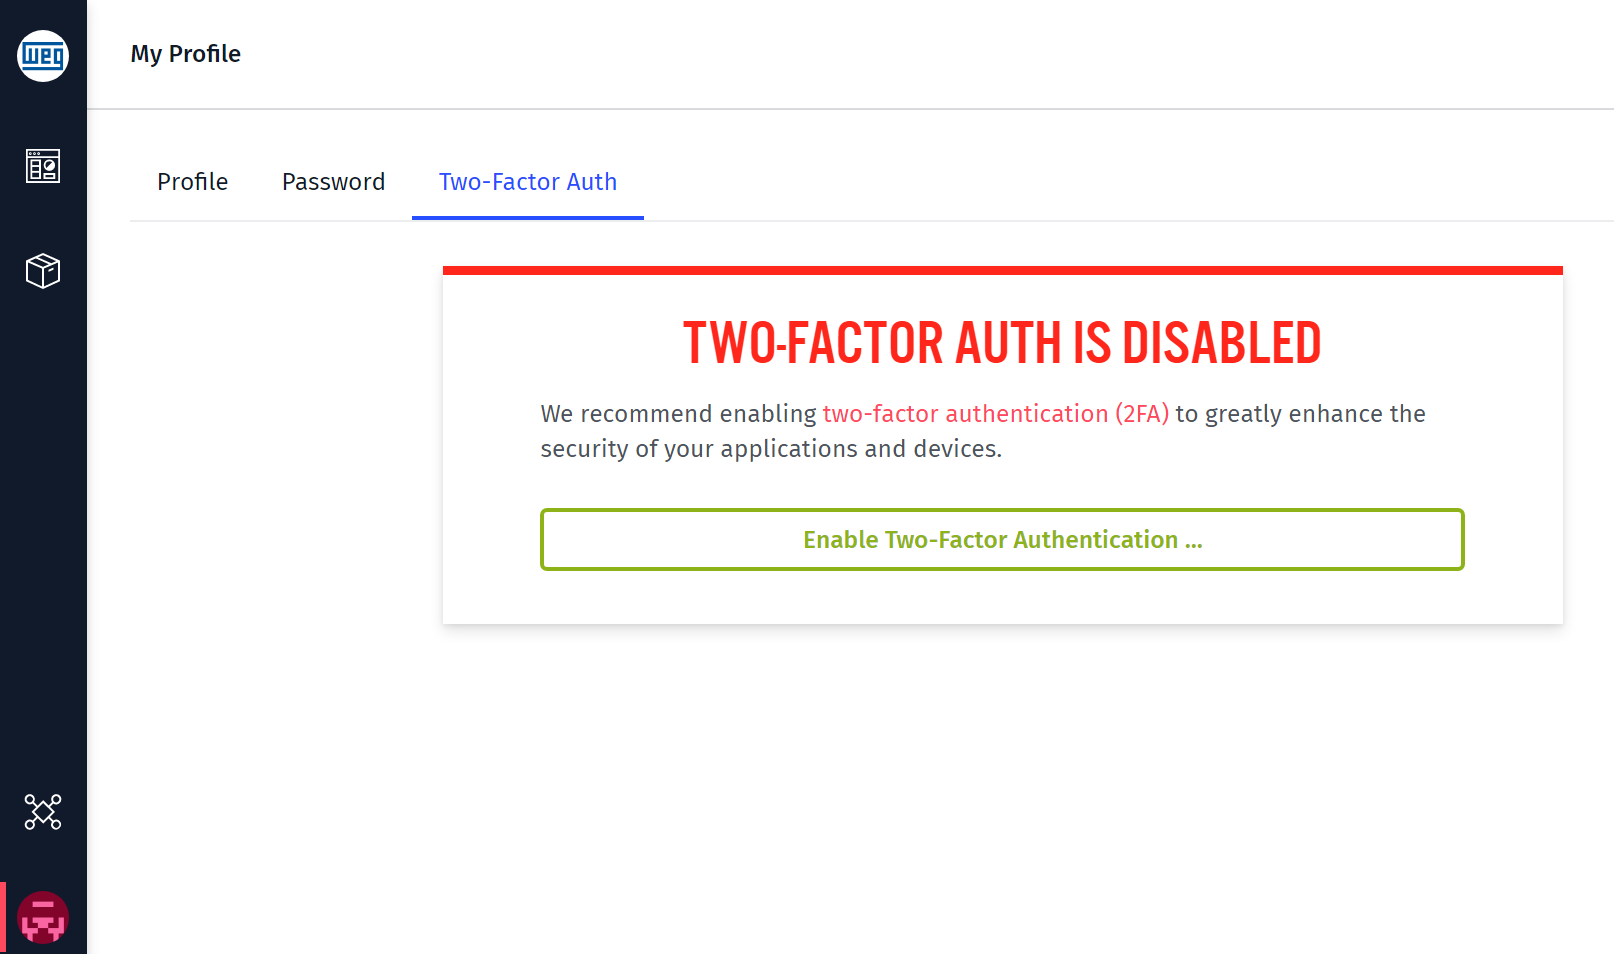 Enable Two-Factor Auth